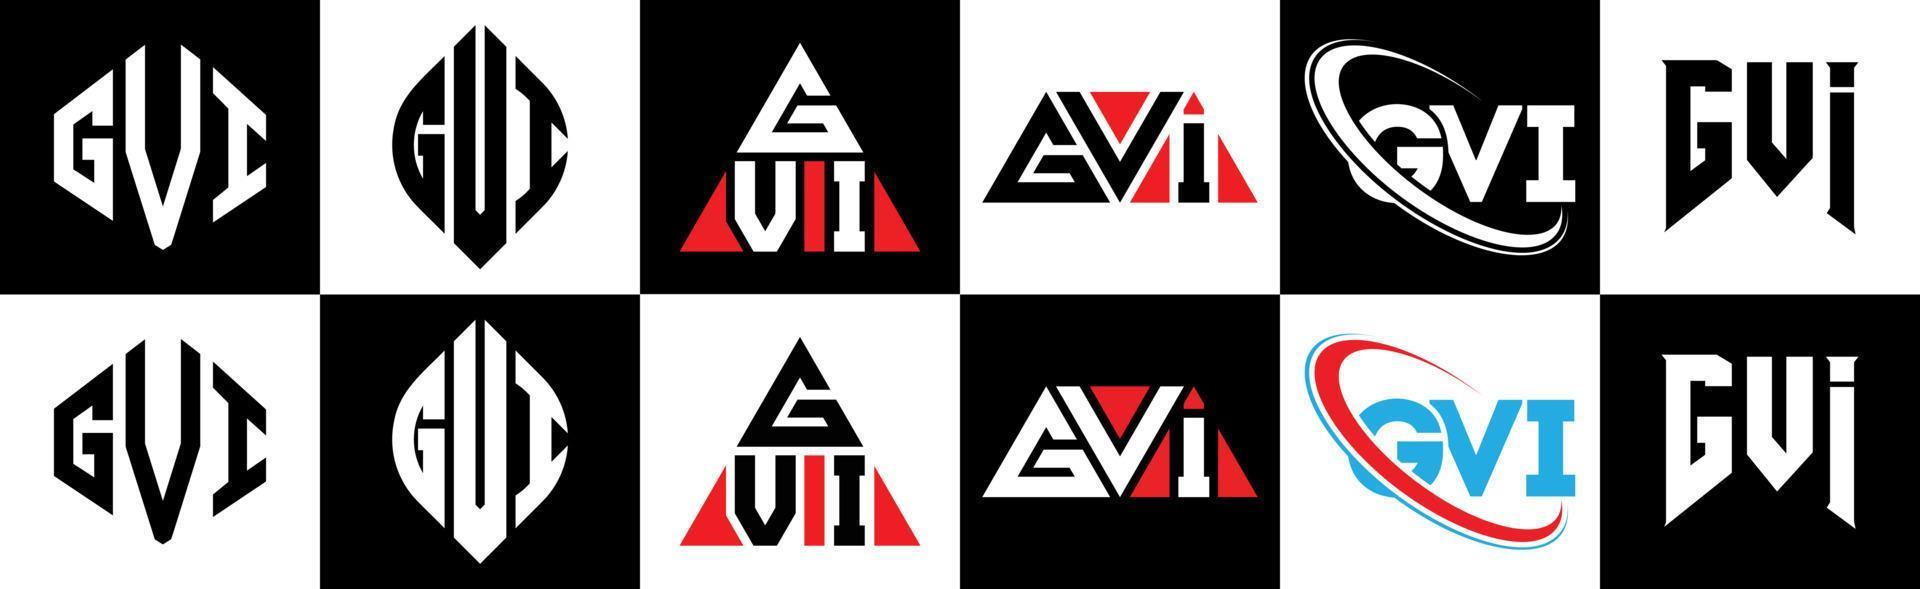 GVI letter logo design in six style. GVI polygon, circle, triangle, hexagon, flat and simple style with black and white color variation letter logo set in one artboard. GVI minimalist and classic logo vector